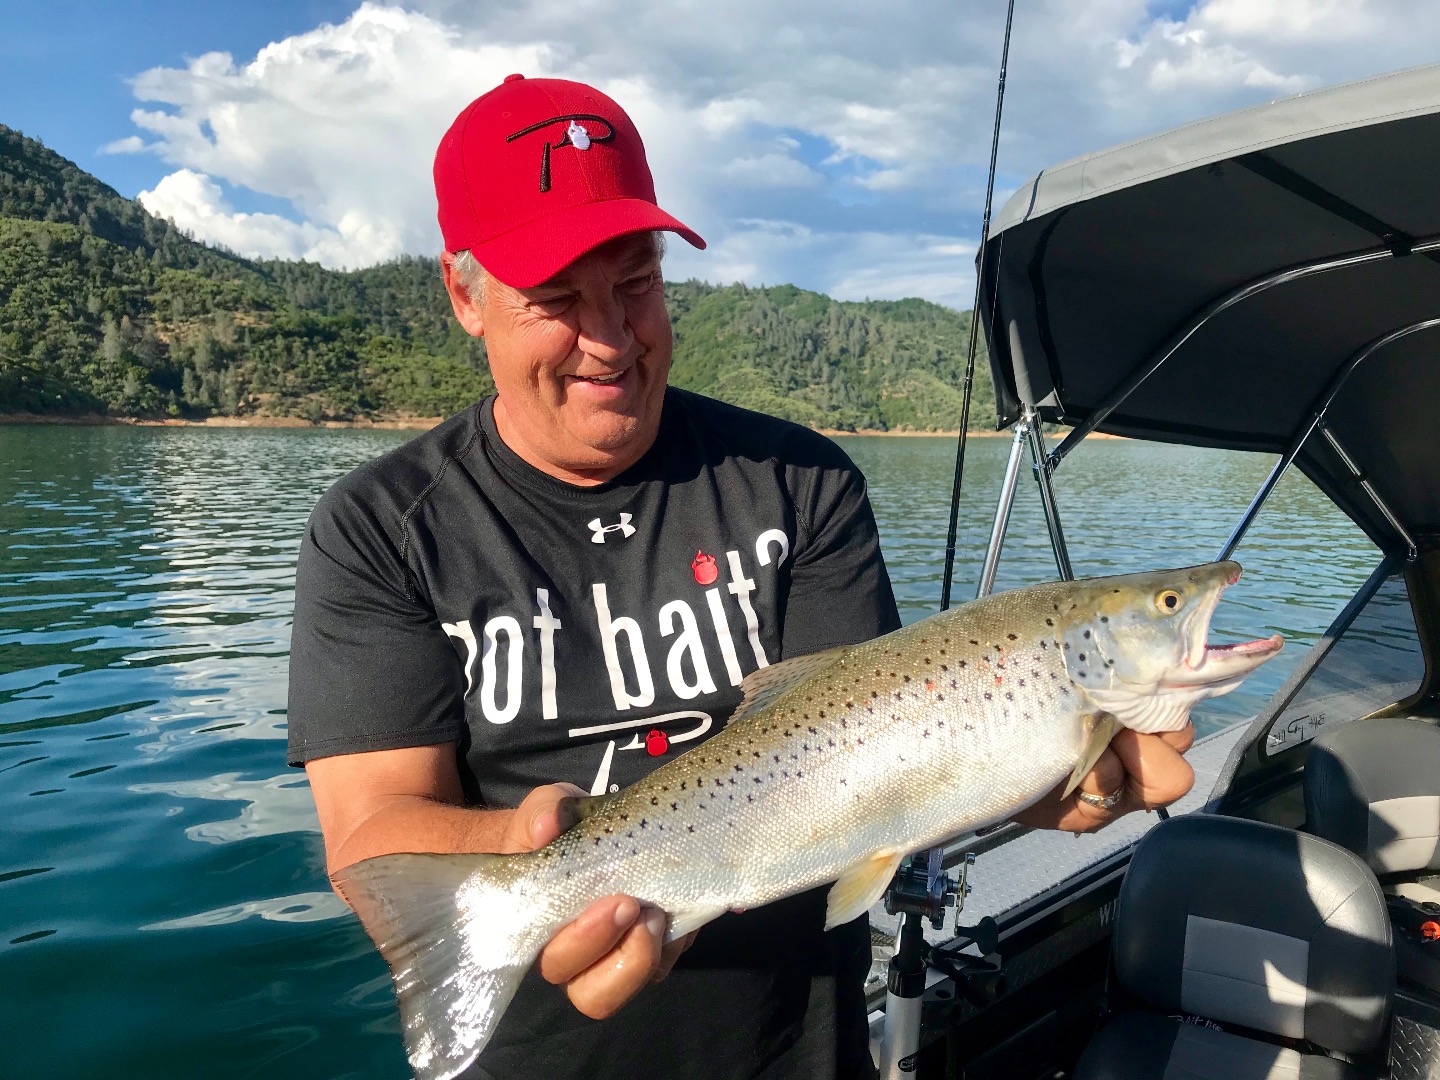 Shasta Lake trout bite on and off